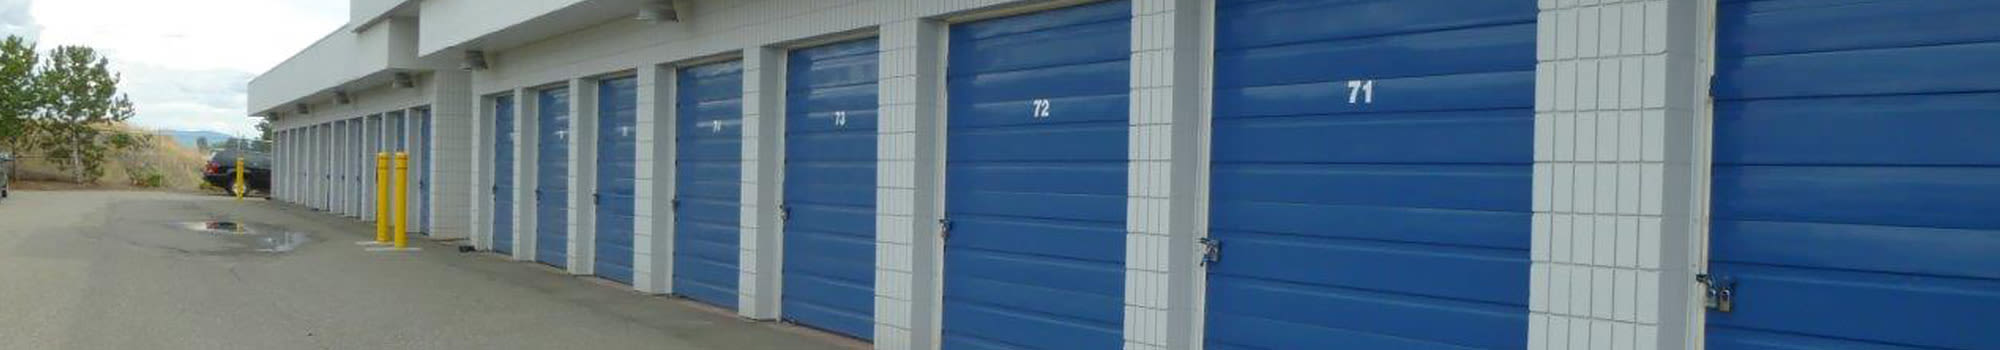 Unit sizes and prices at Budget Self Storage in Kamloops, British Columbia